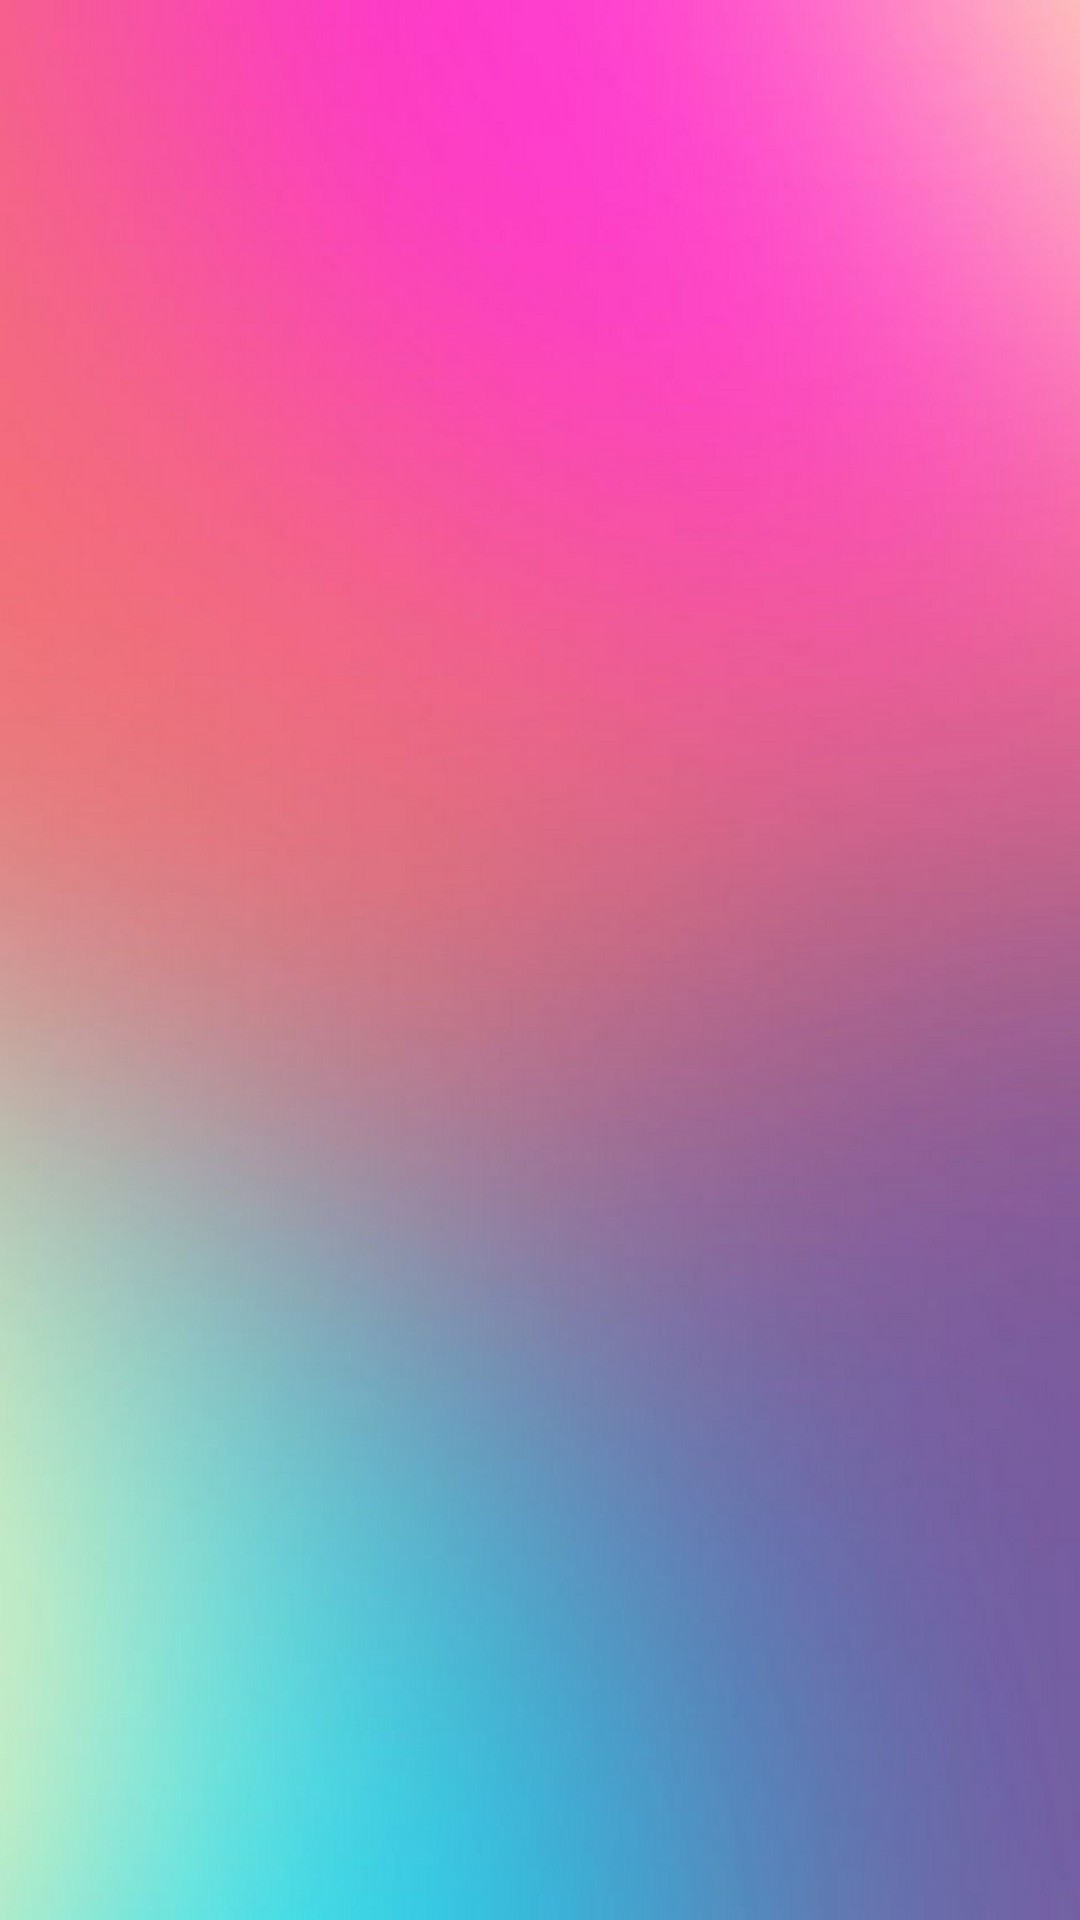 Gradient Wallpaper With high-resolution 1080X1920 pixel. You can use this wallpaper for your Windows and Mac OS computers as well as your Android and iPhone smartphones